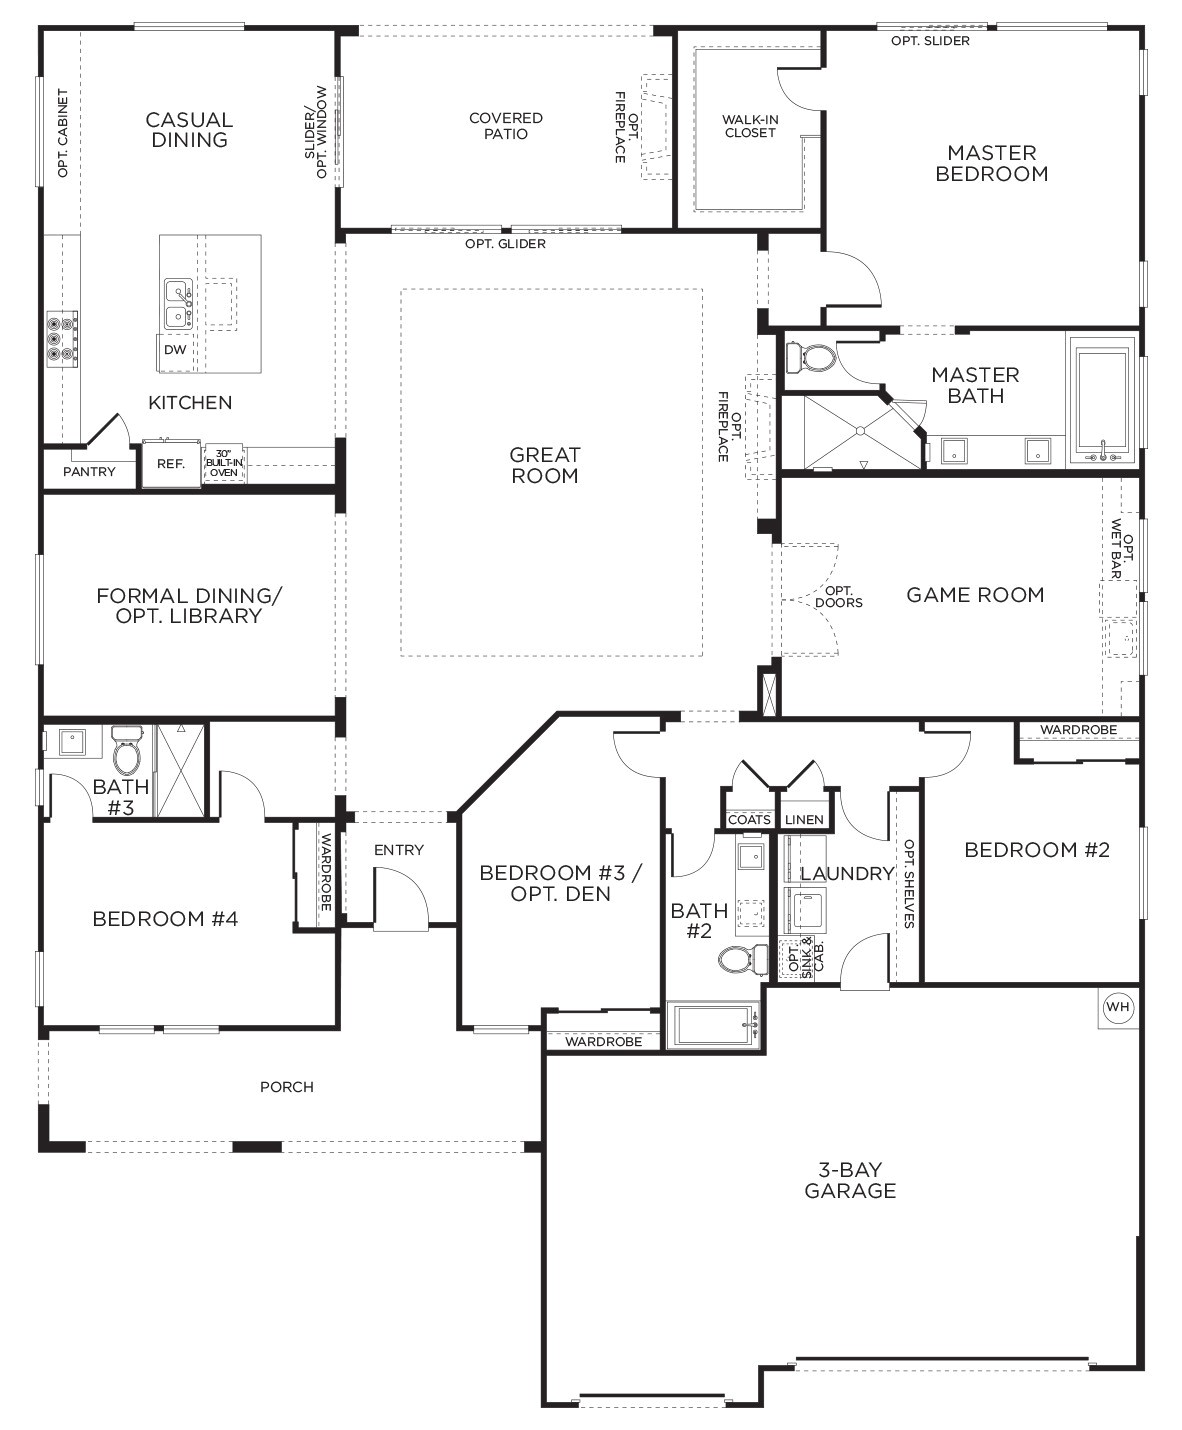 four bedroomed single storey house plan single story floor plans one story house plans pardee homes a